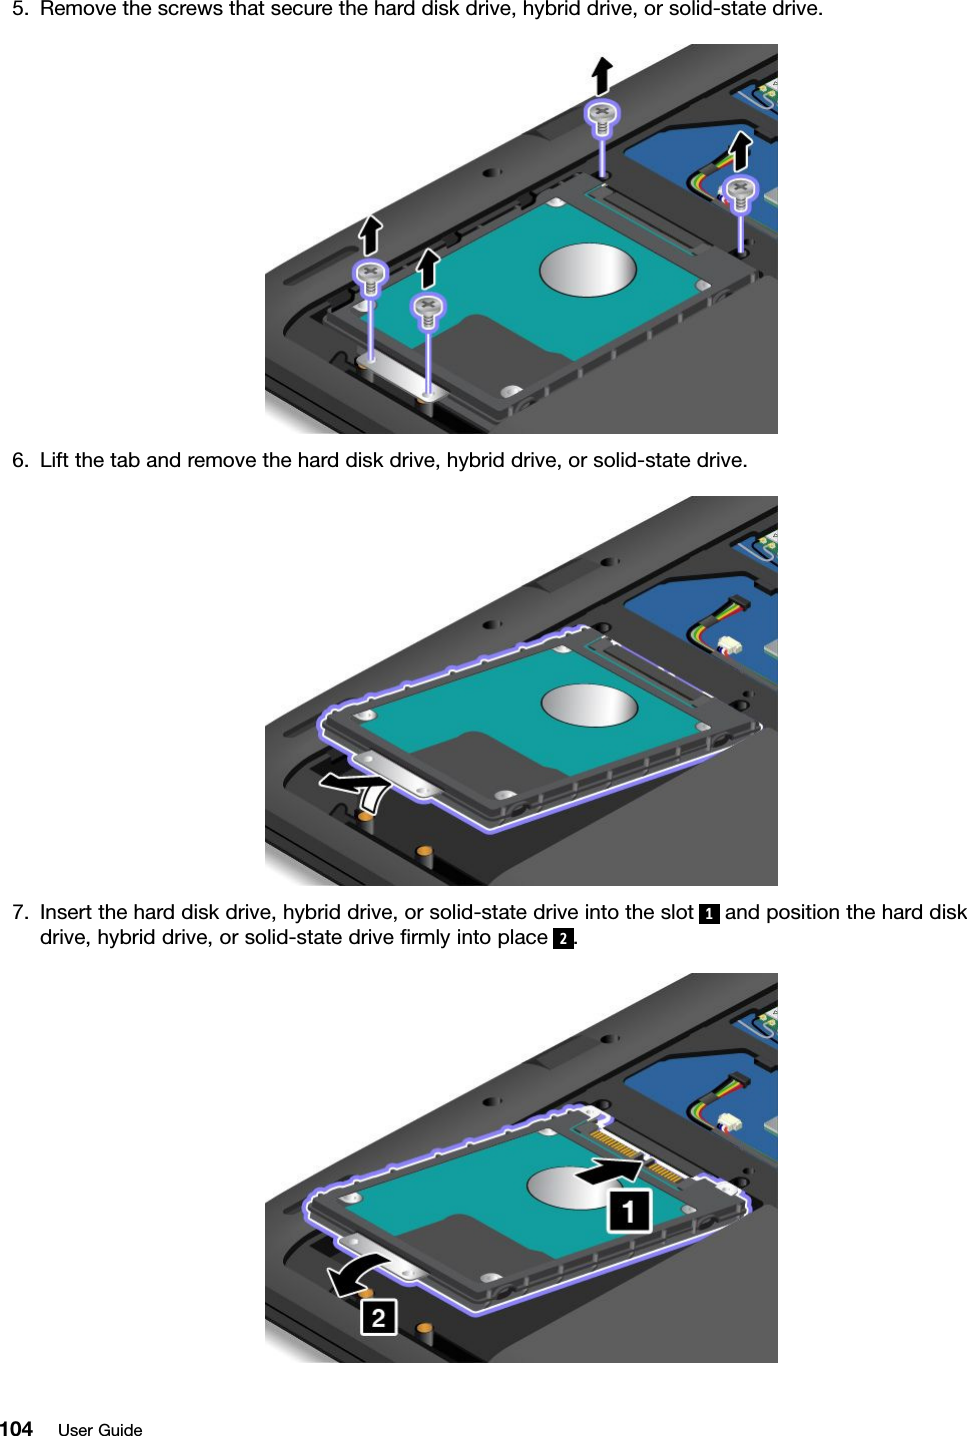 5. Remove the screws that secure the hard disk drive, hybrid drive, or solid-state drive.6. Lift the tab and remove the hard disk drive, hybrid drive, or solid-state drive.7. Insert the hard disk drive, hybrid drive, or solid-state drive into the slot 1and position the hard diskdrive, hybrid drive, or solid-state drive ﬁrmly into place 2.104 User Guide